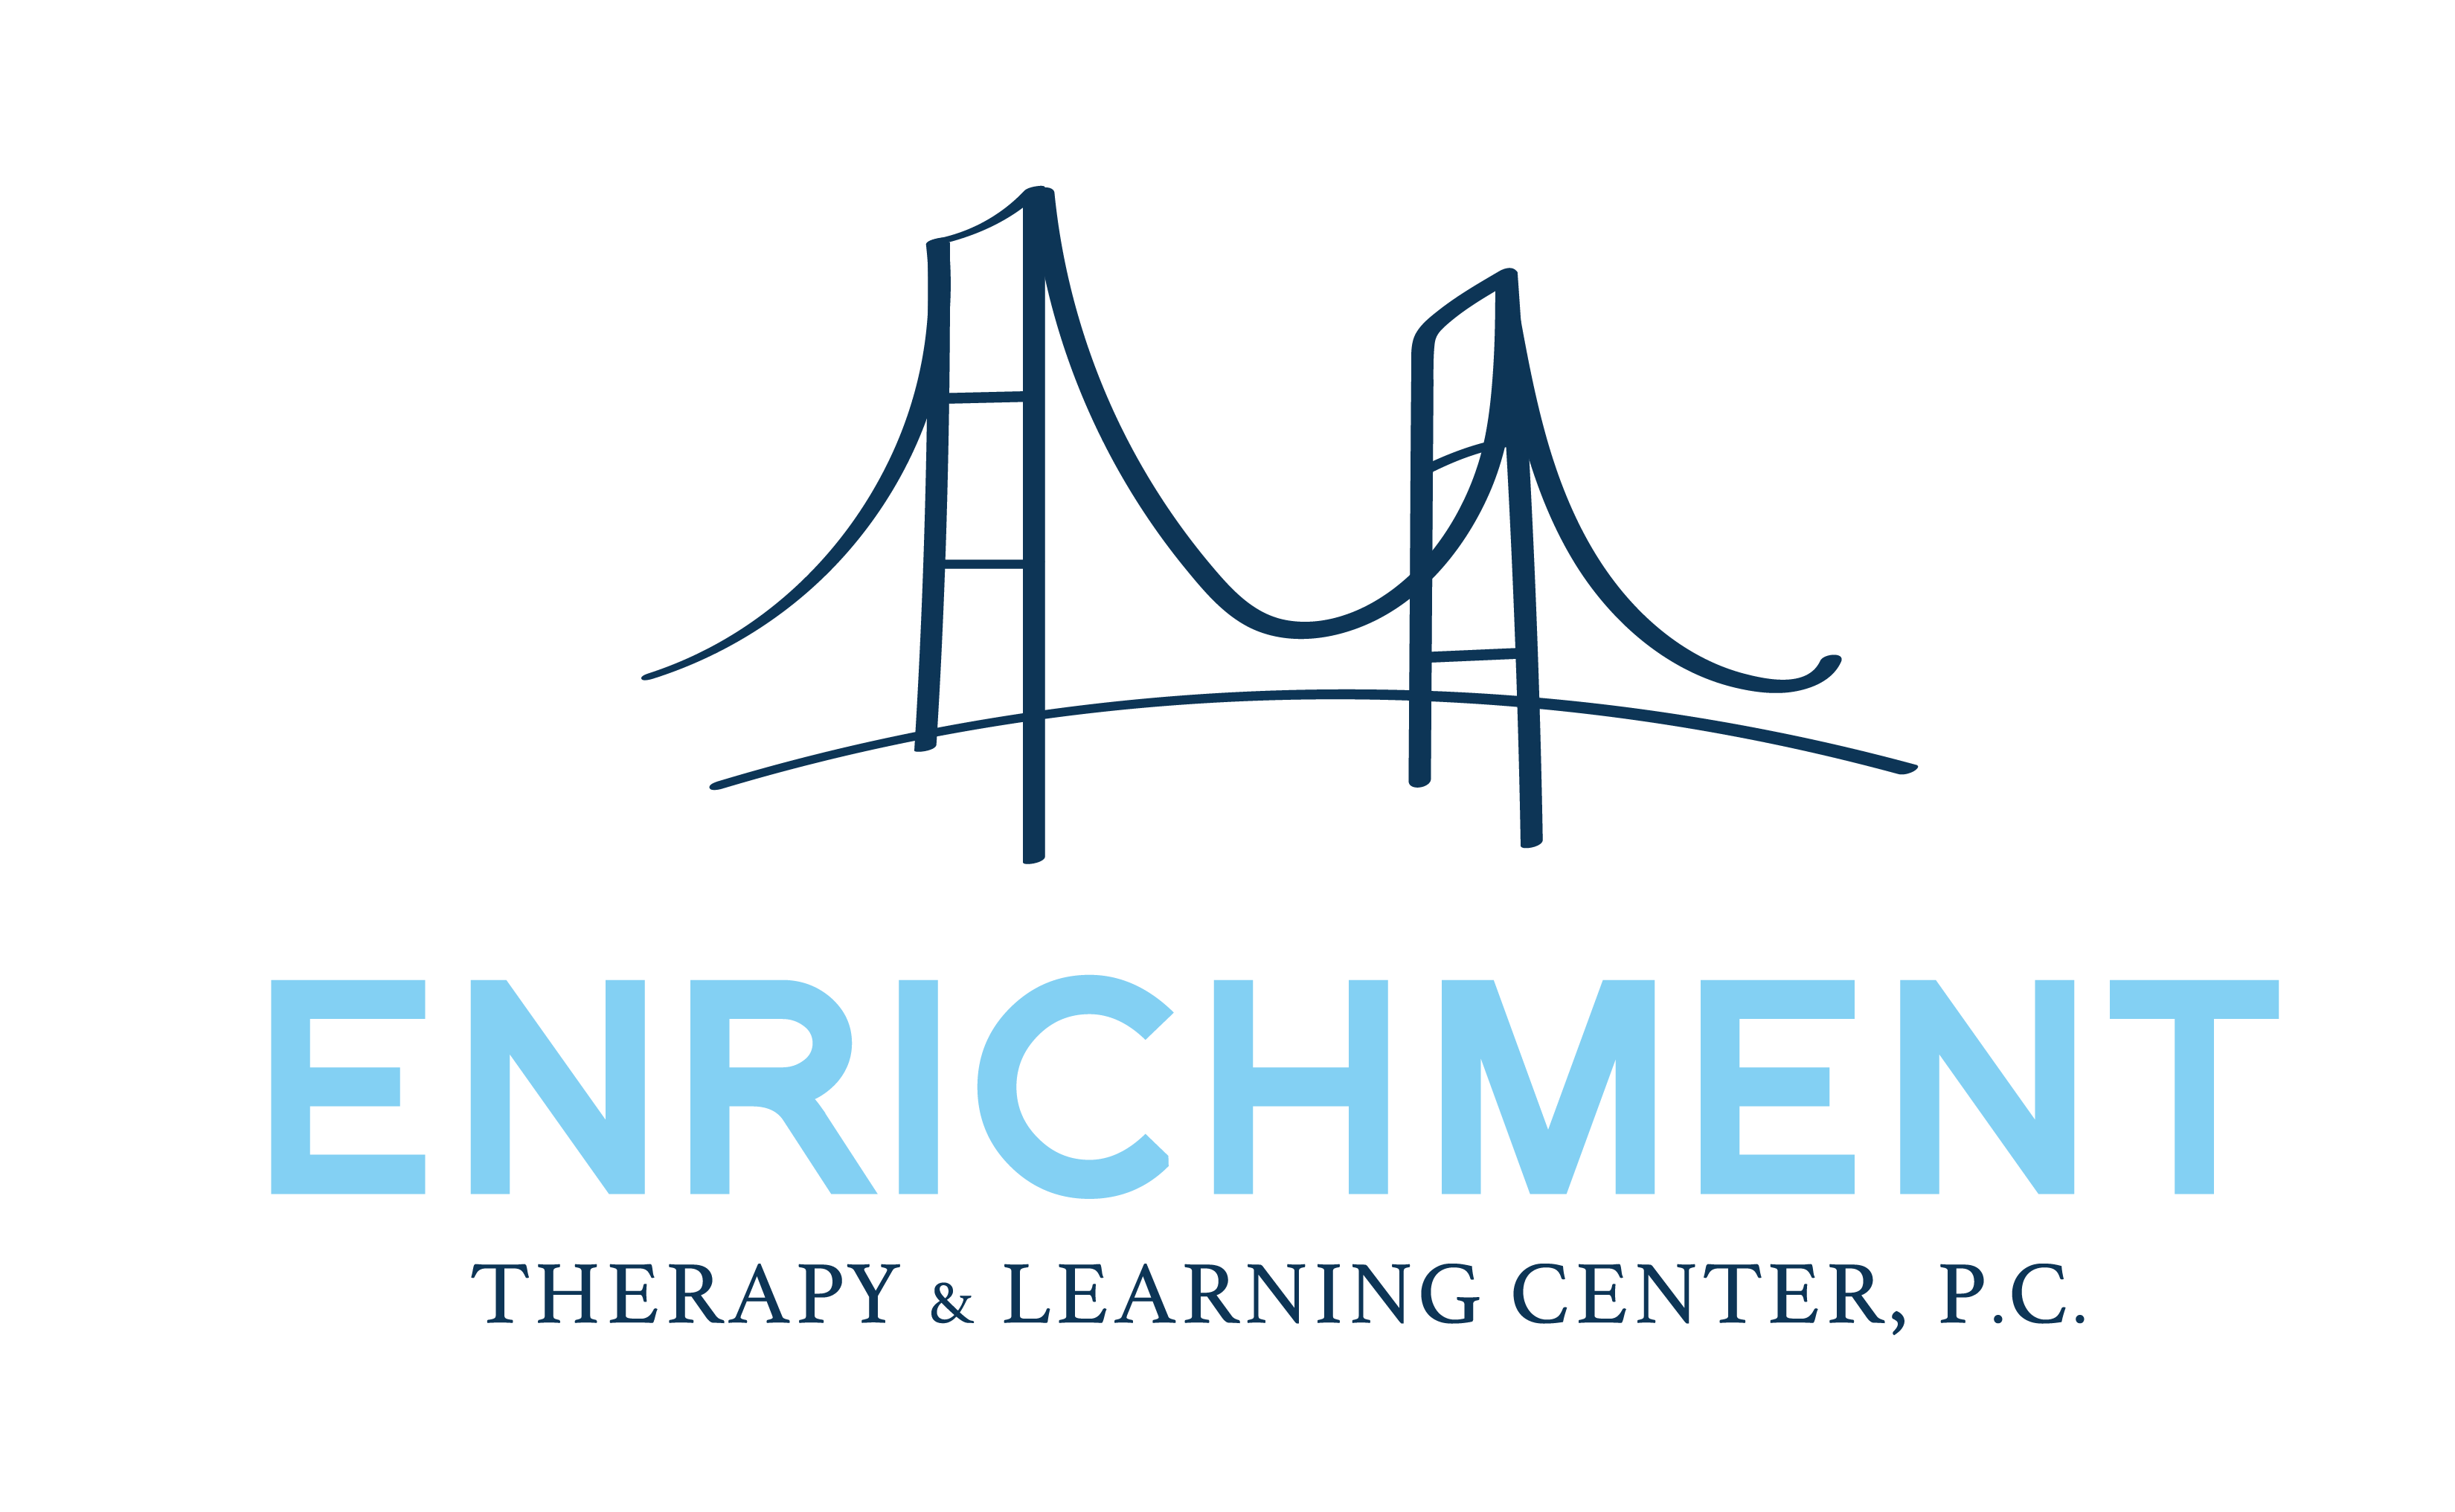 Enrichment Therapy & Learning Center